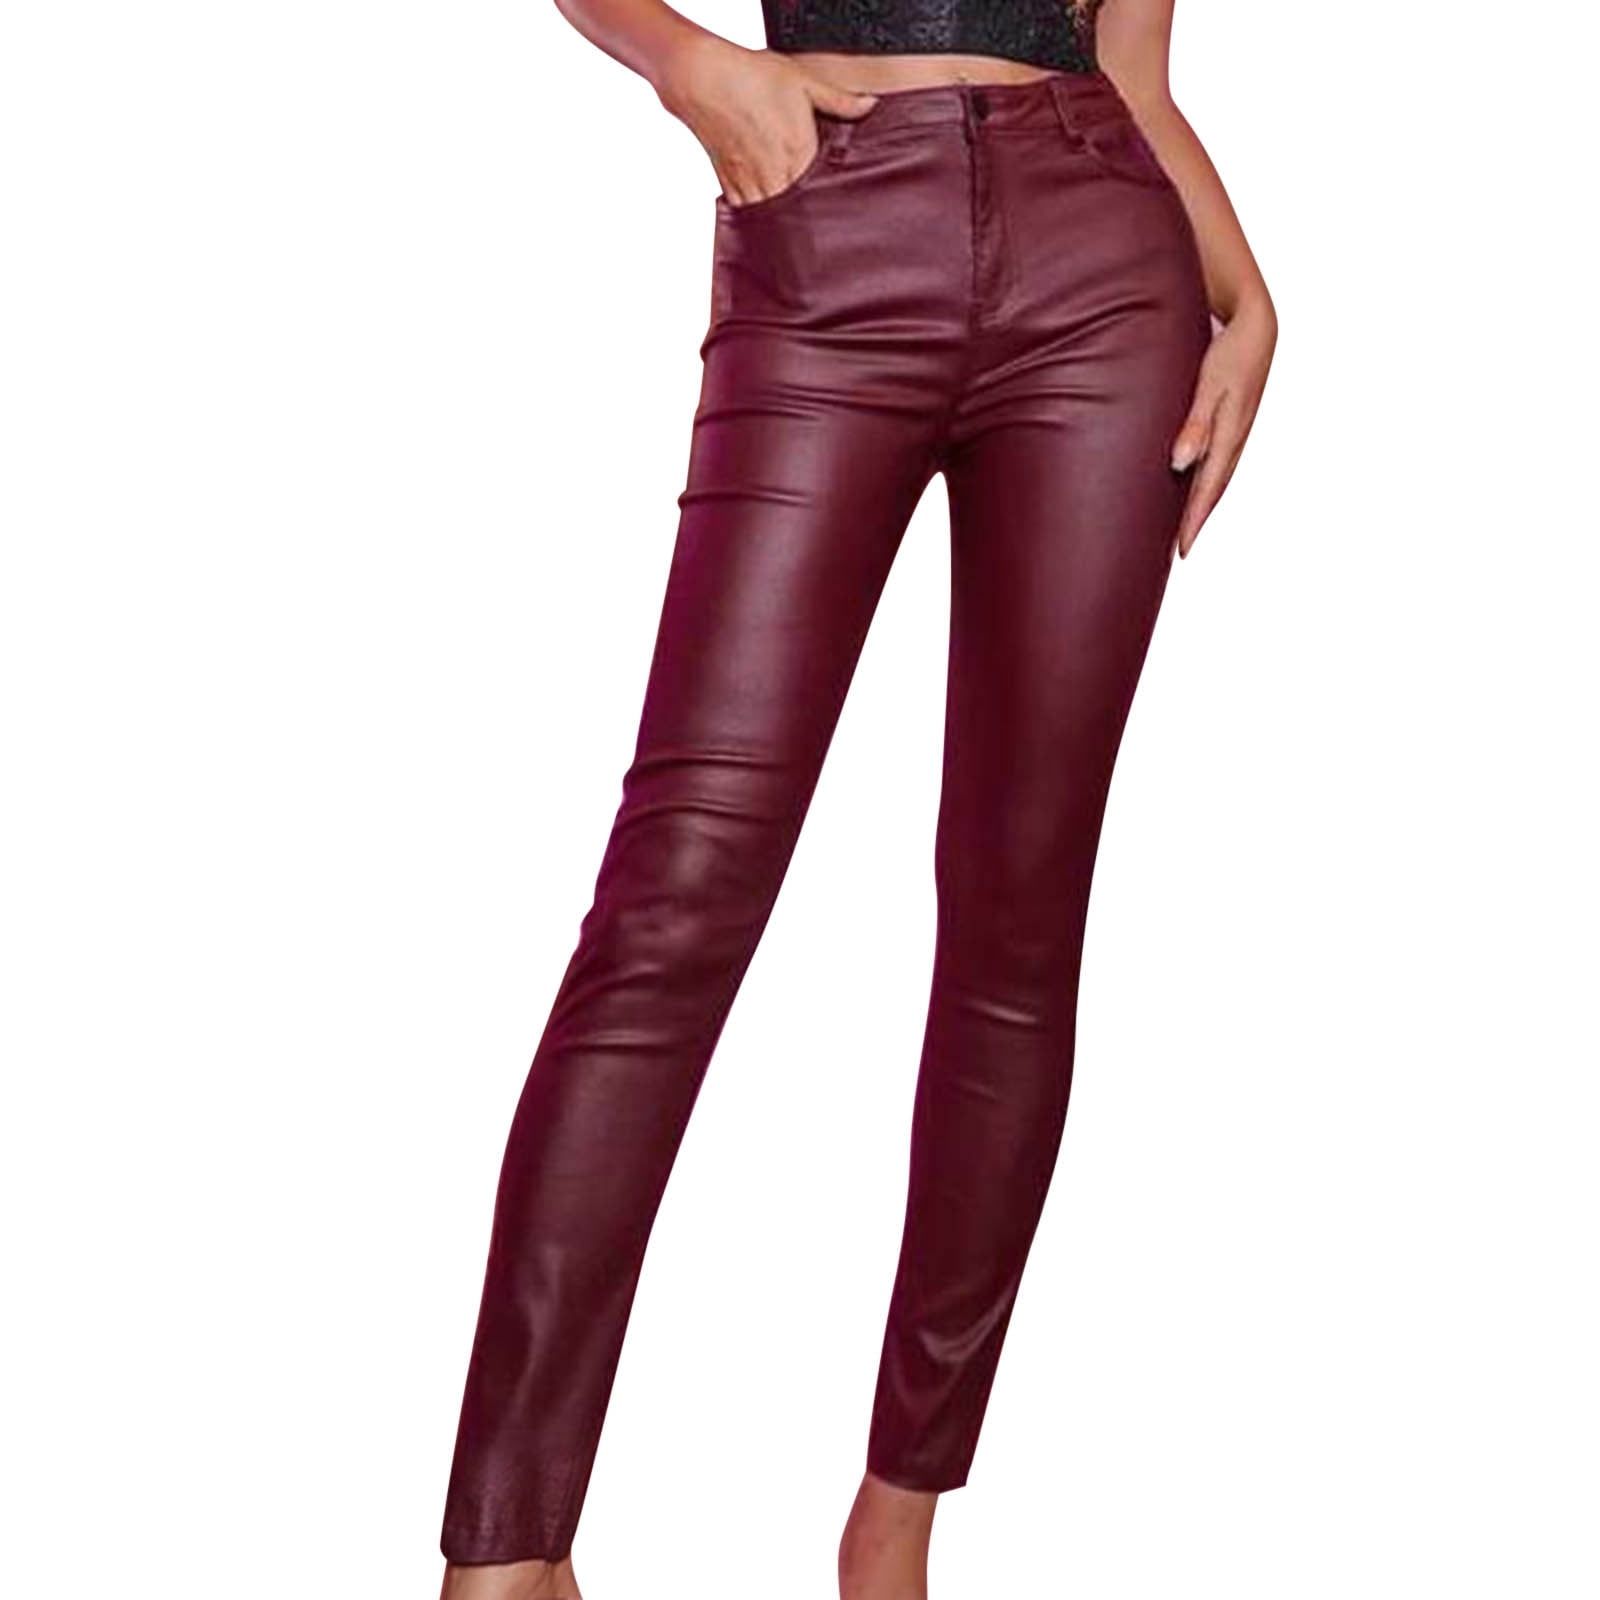 HSMQHJWE Real Leather Pants For Women Plus Size Leather Leggings For Women  Ripped Womens Drawstring Elastic Waist Satin Sweatpants Ankle Length  Joggers With Pocket Summer Cotton Shorts Women 